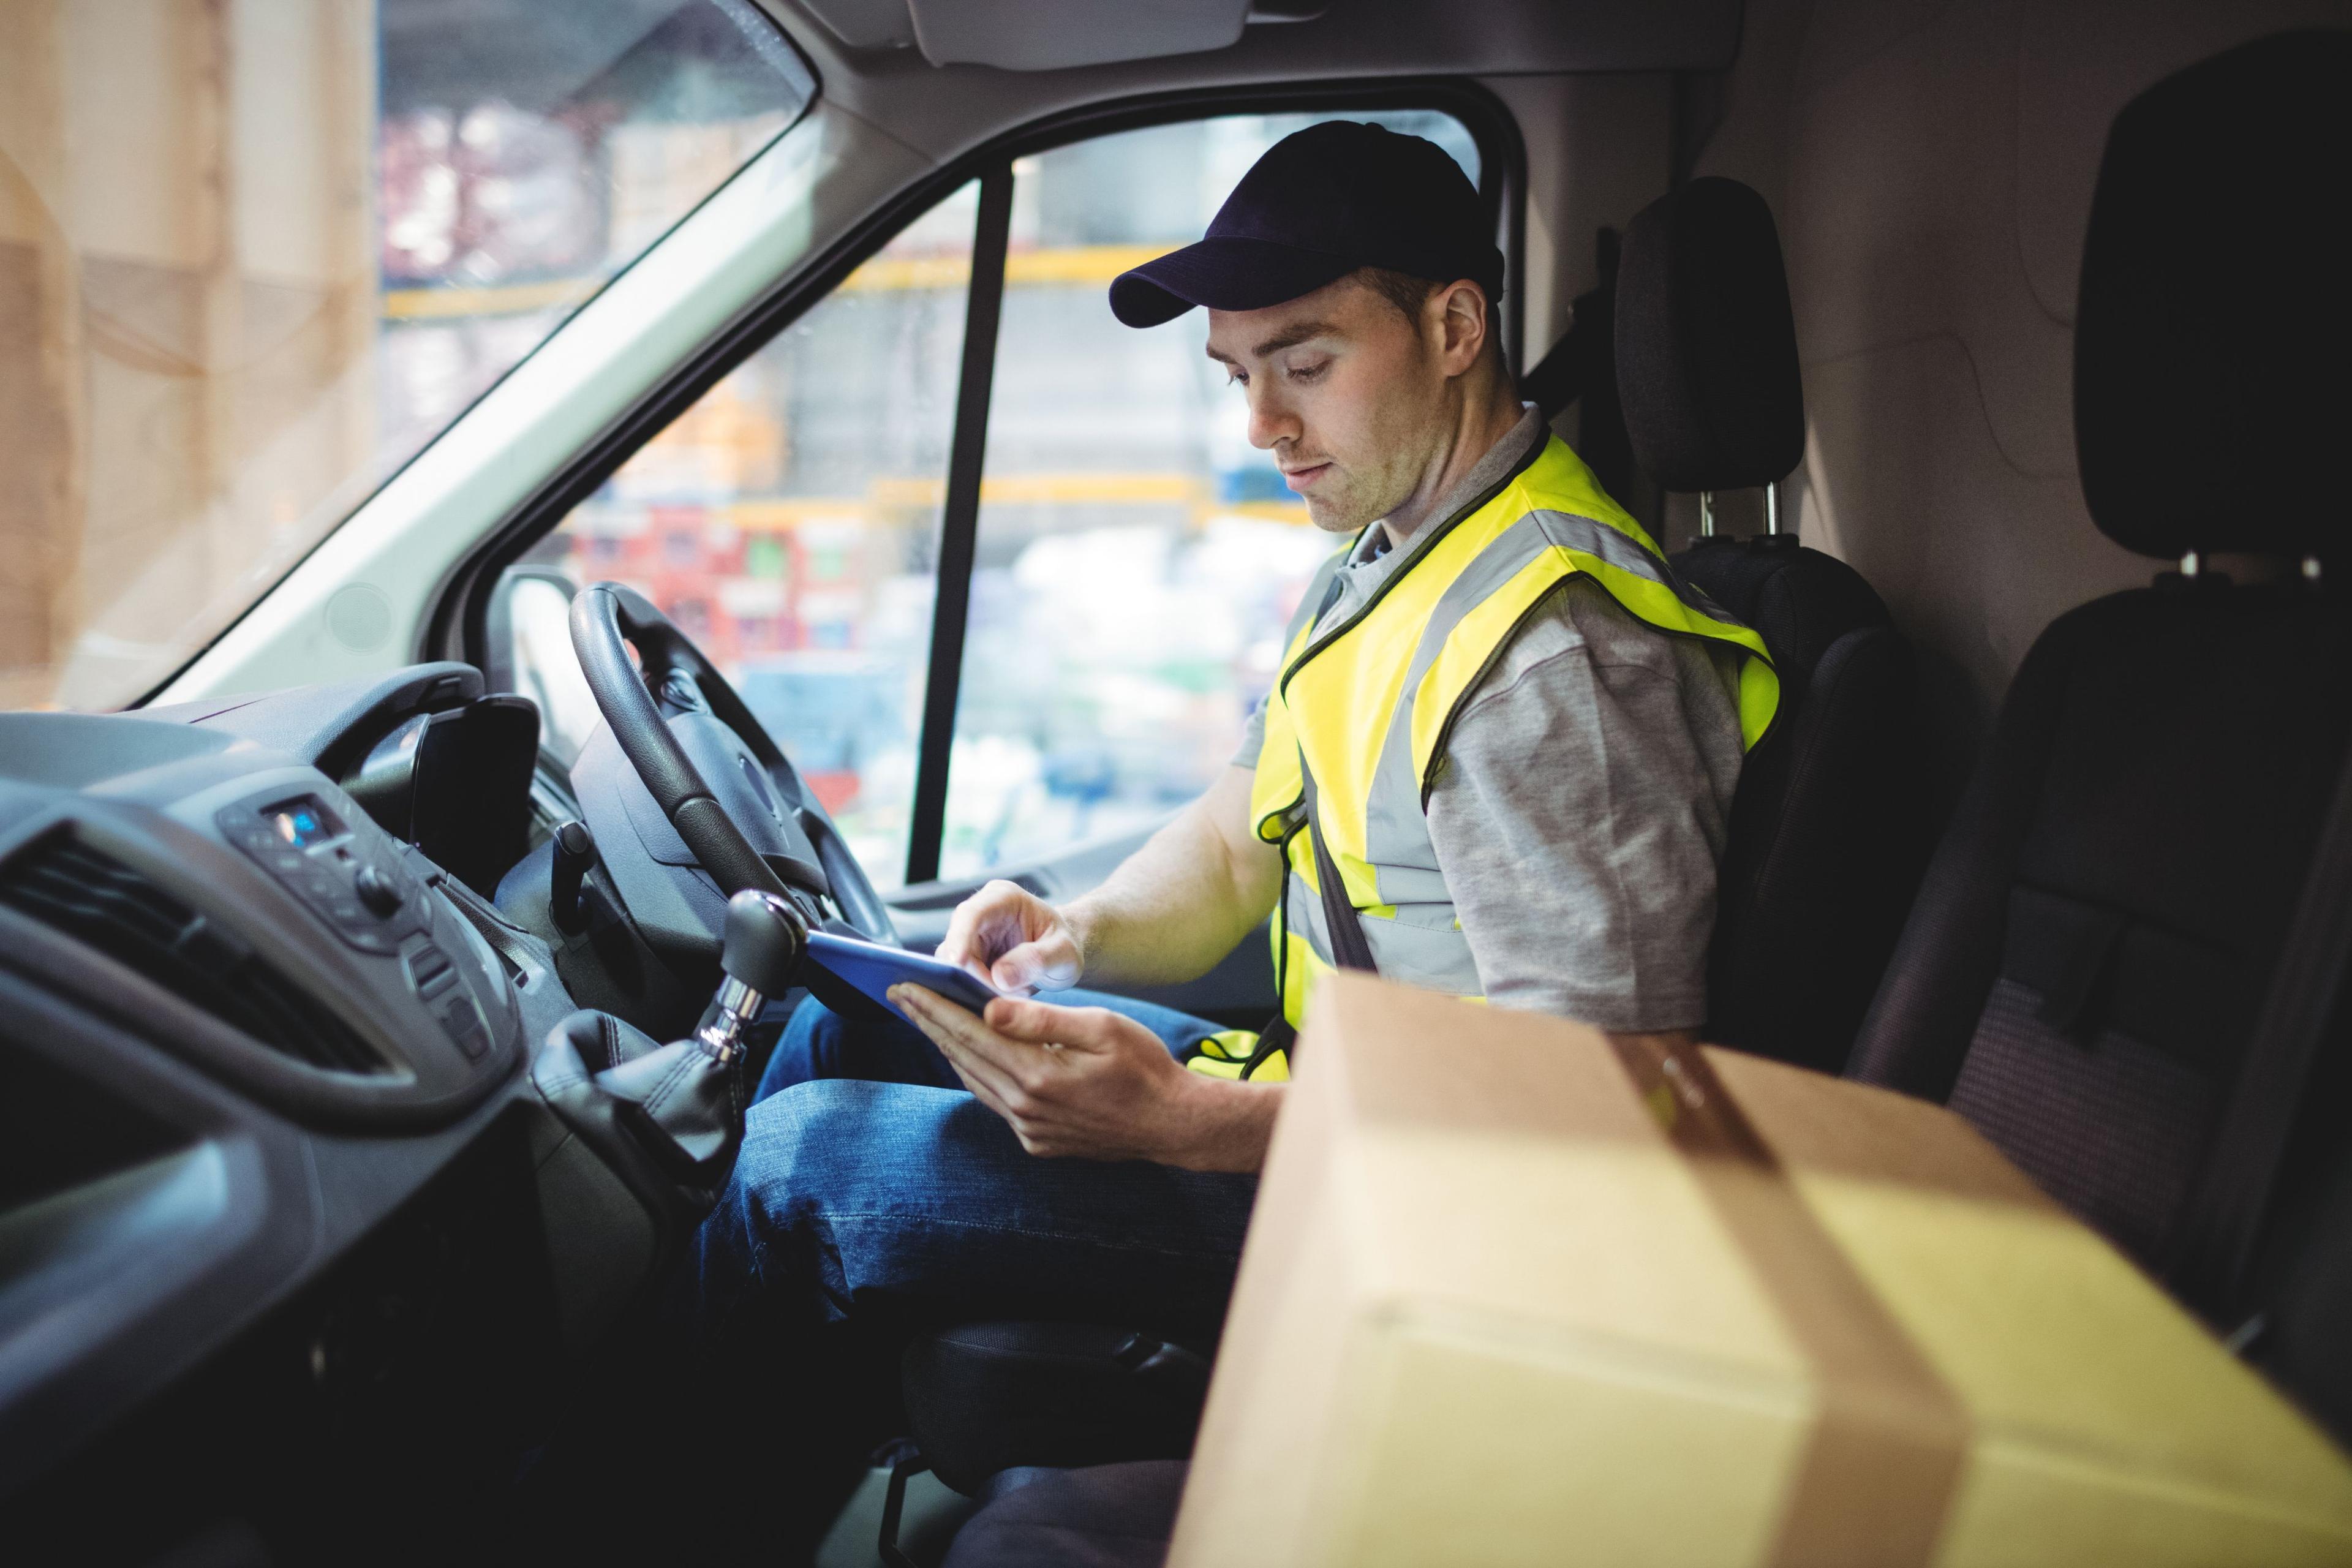 Courier driver in the front seat of their van using a mobile device